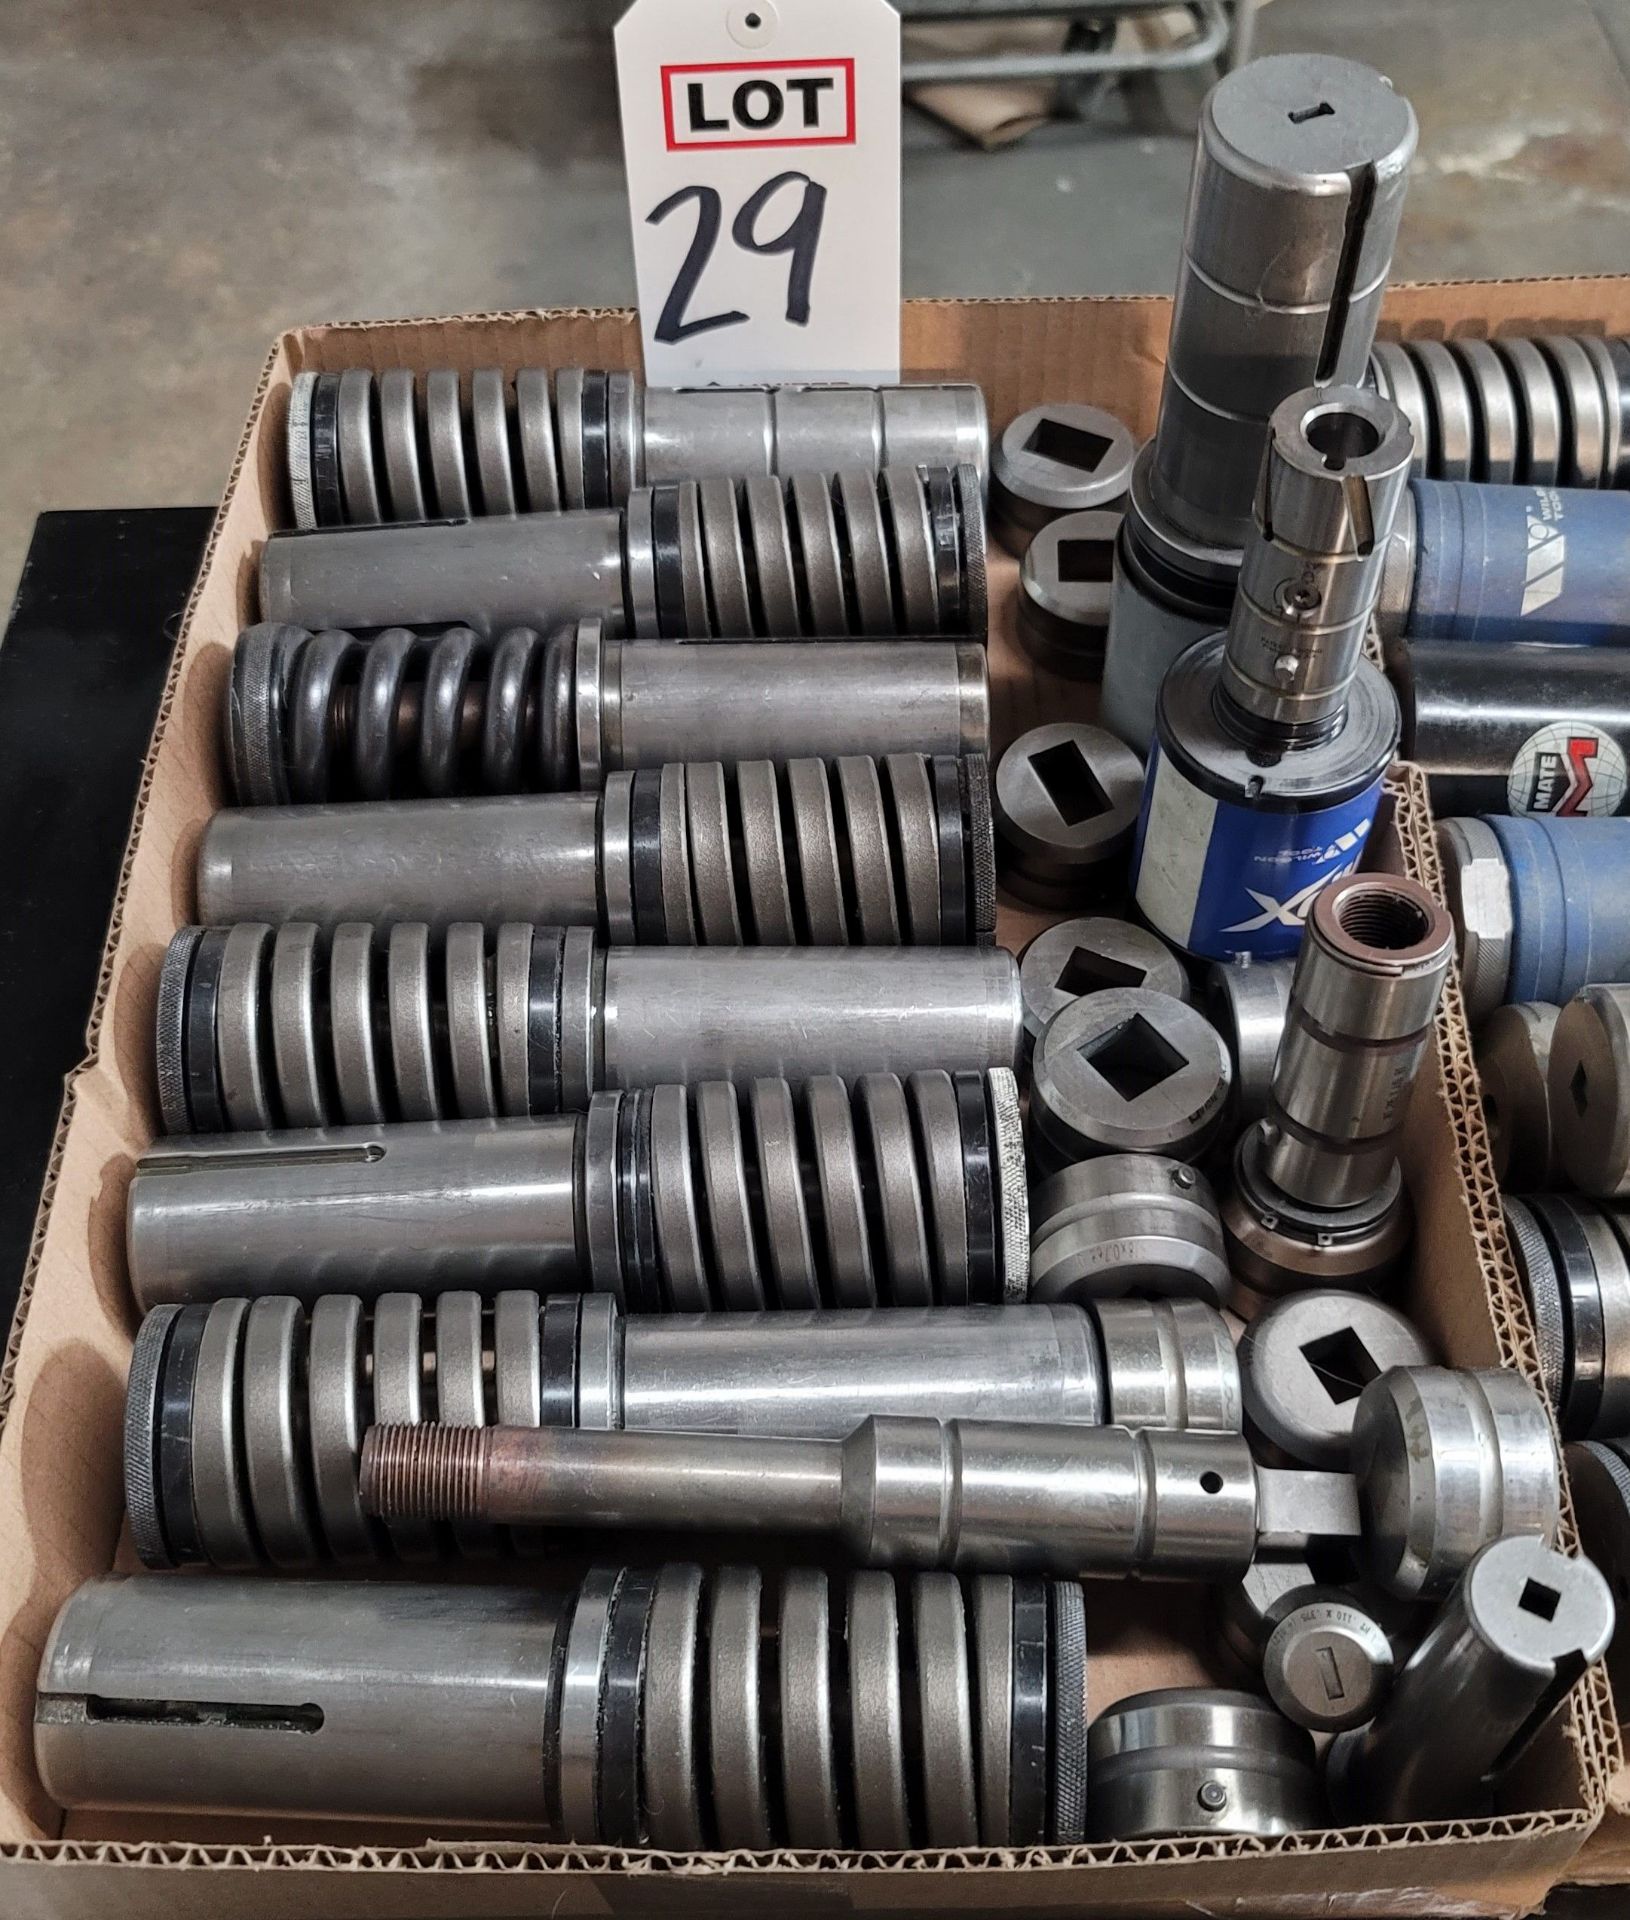 LOT - AMADA PUNCH PRESS TOOLING, (LOCATION: 2174 W 2300 S)